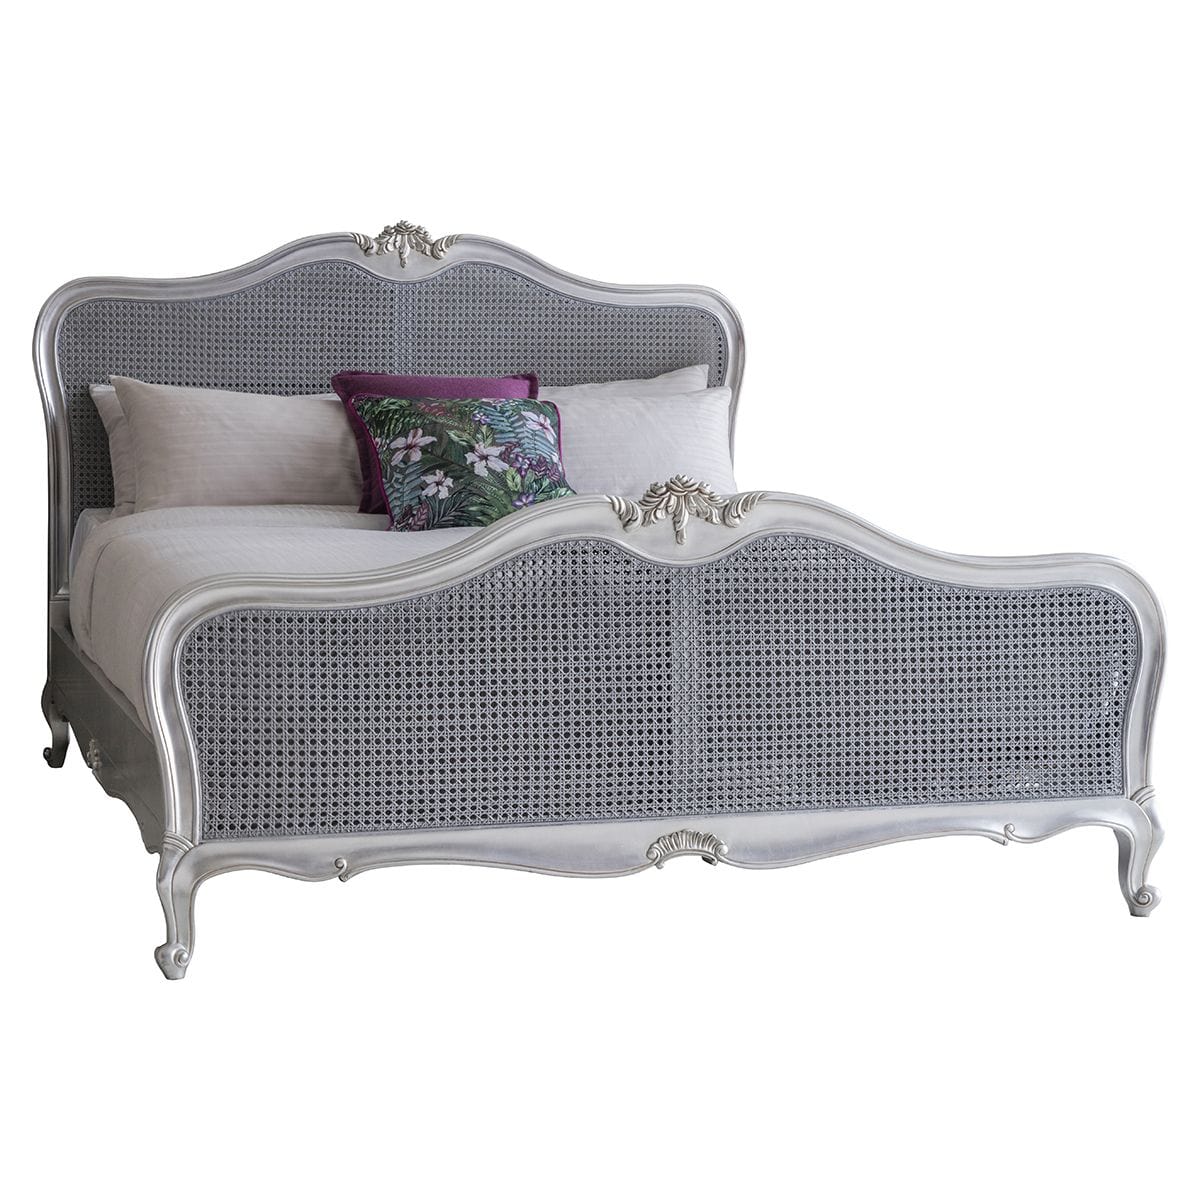 Chic Cane Bed